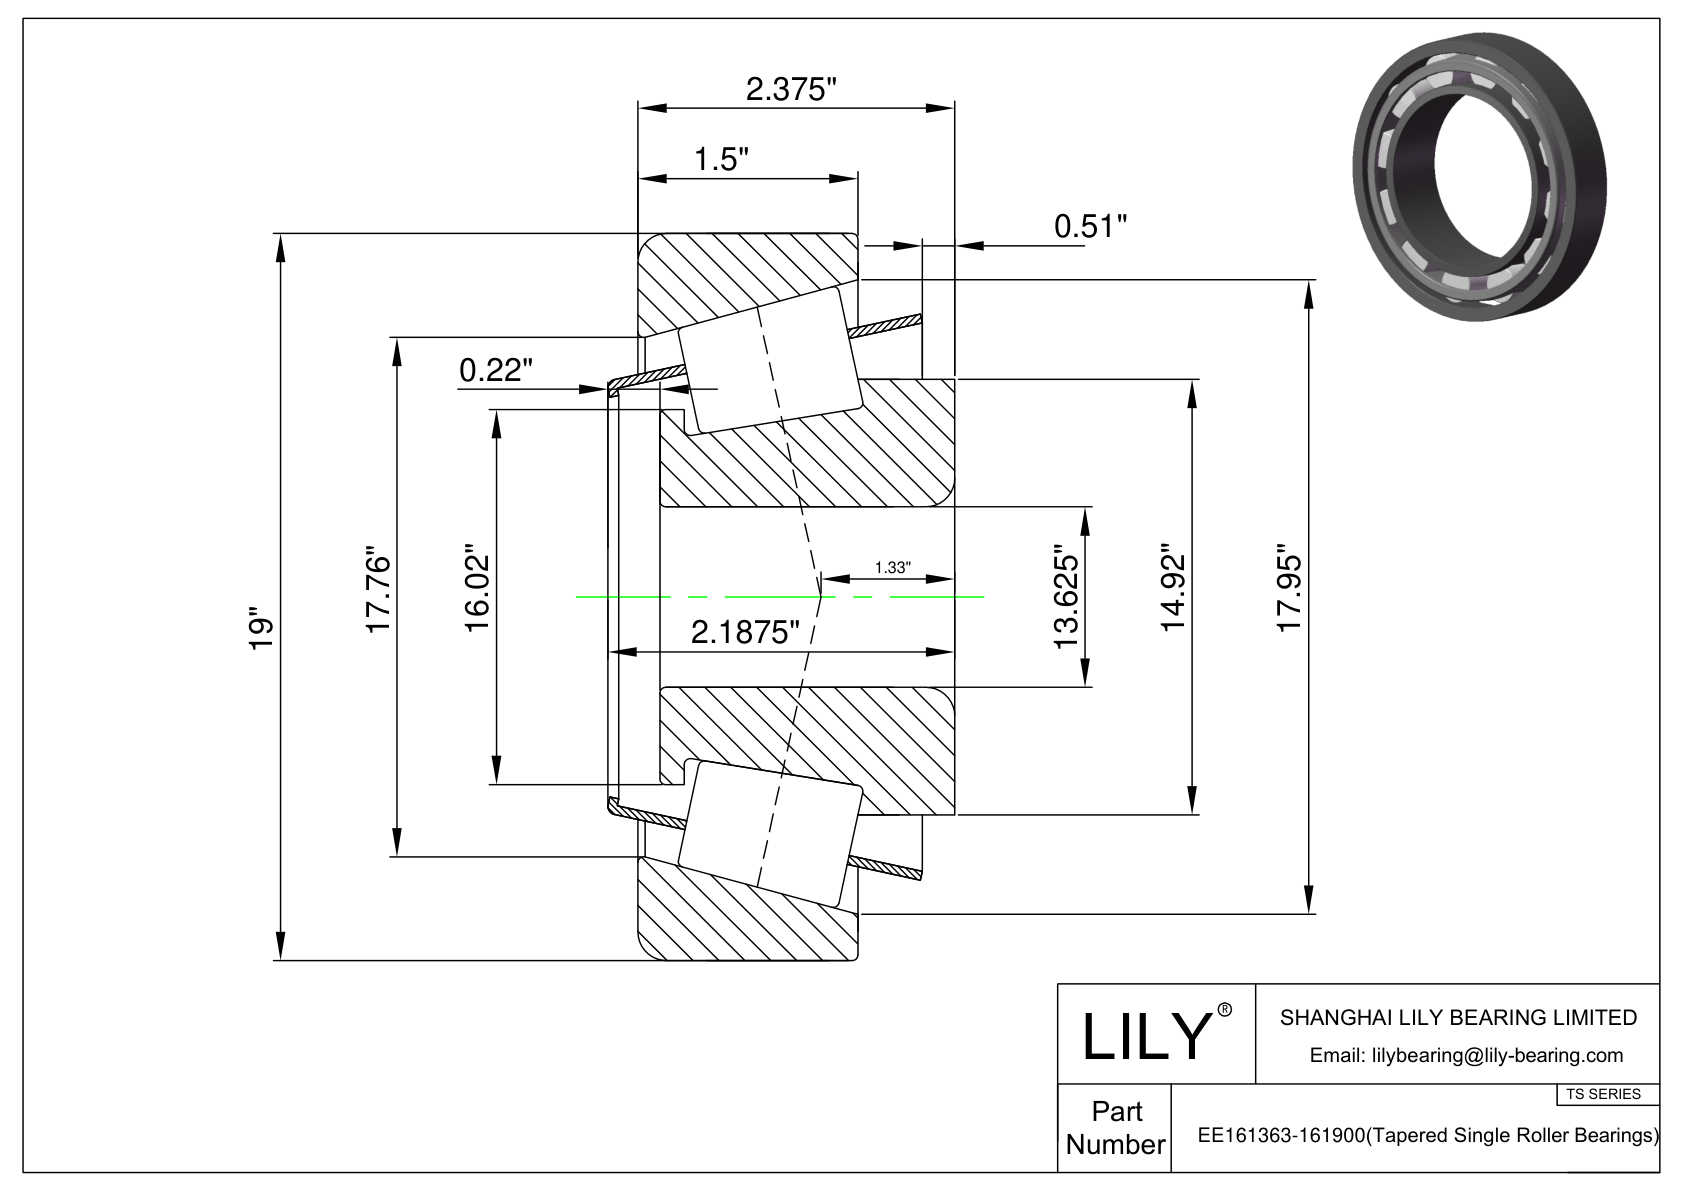 EE161363-161900 TS (Tapered Single Roller Bearings) (Imperial) cad drawing